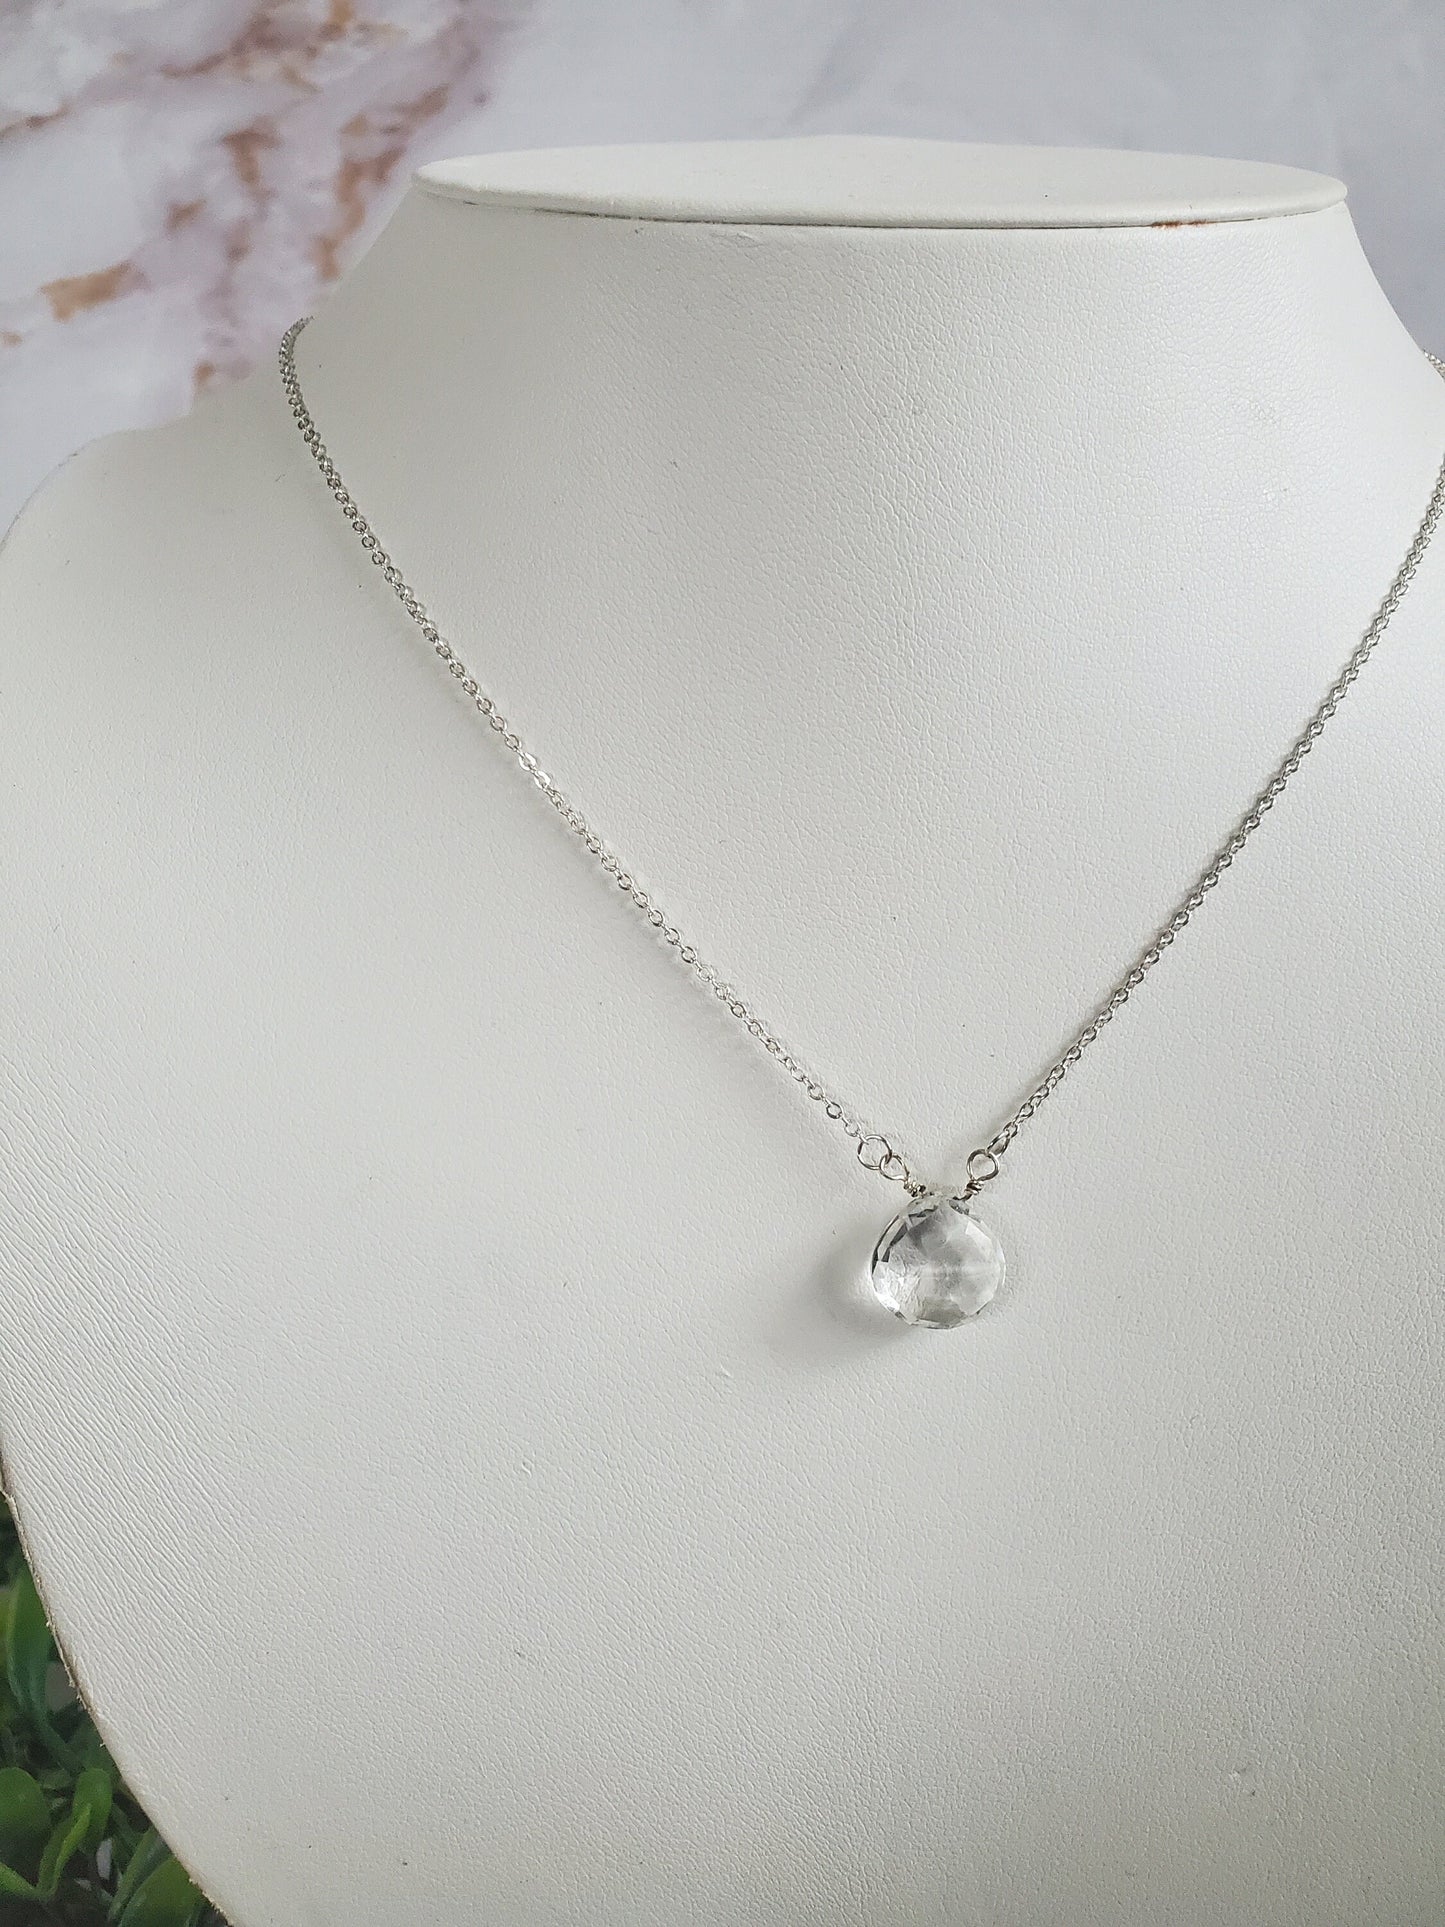 Clear Quartz on Sterling Silver